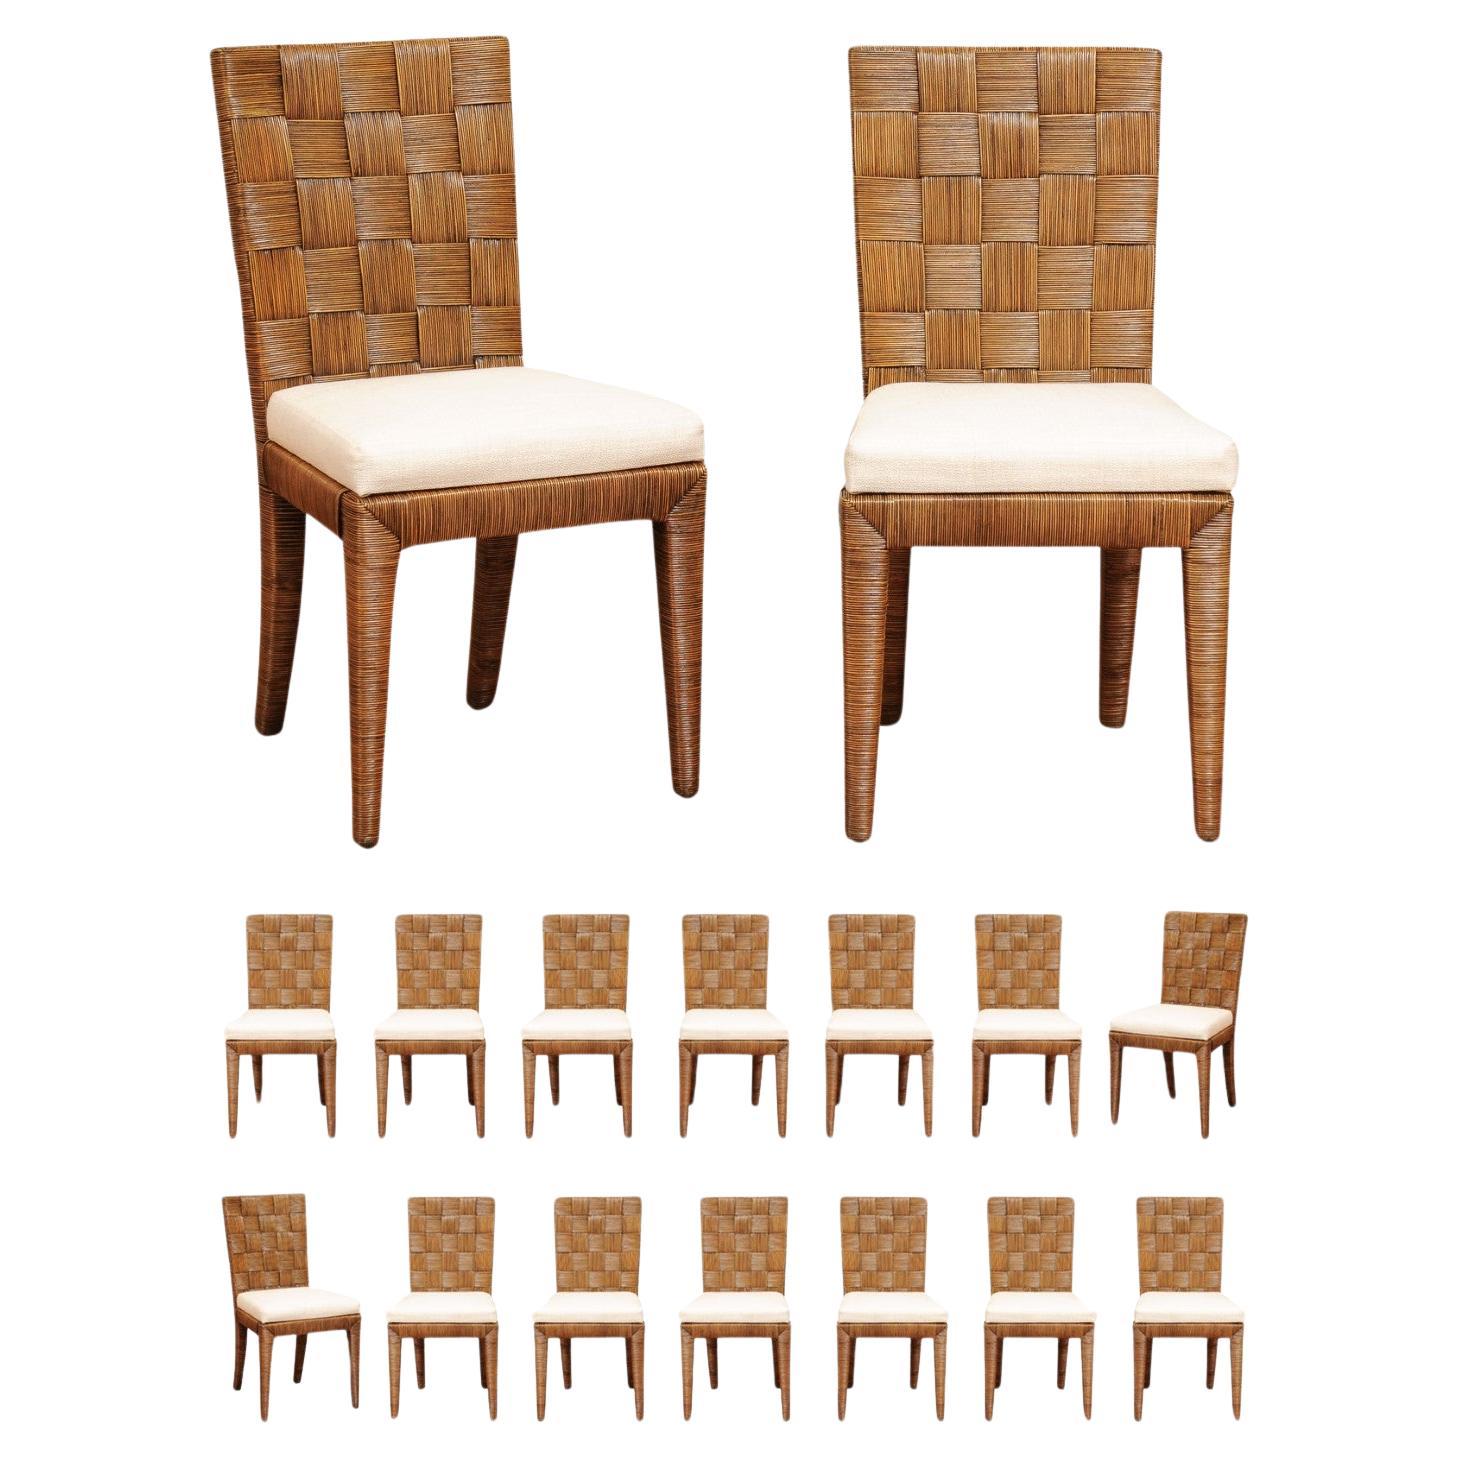 Incredible Set of 16 Vintage Tobacco Cane Chairs by John Hutton for Donghia